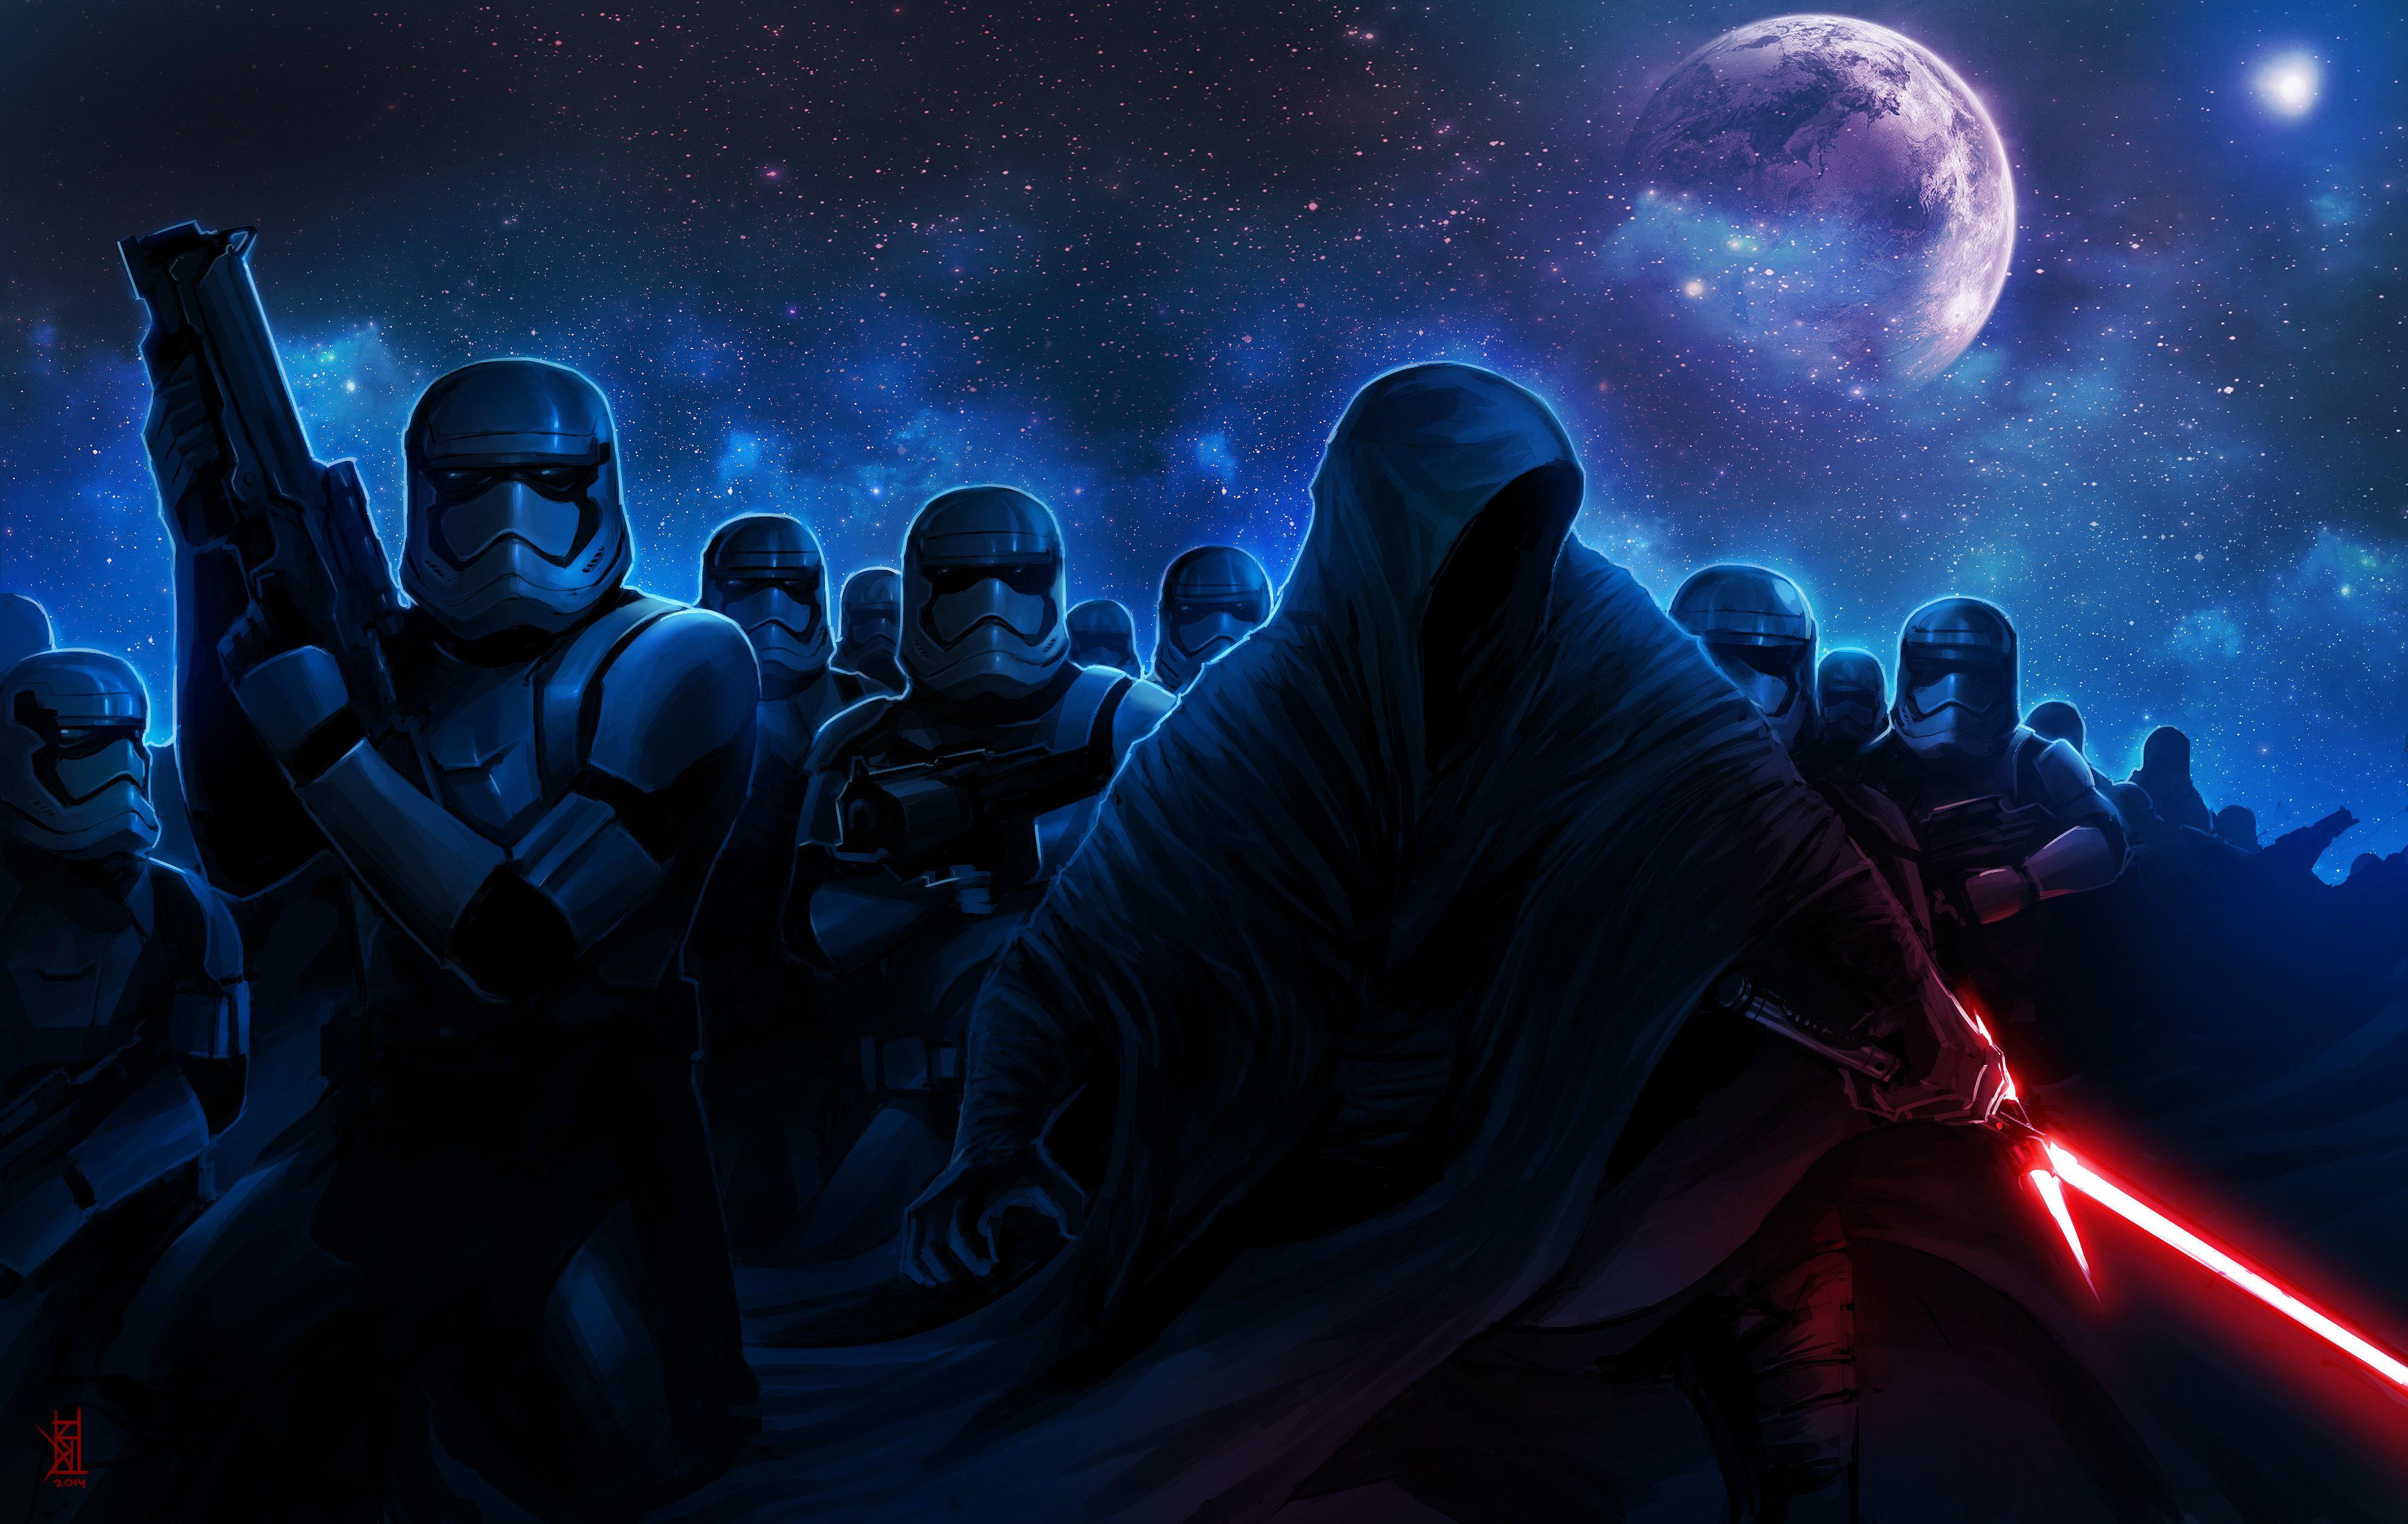 animated star wars wallpapers